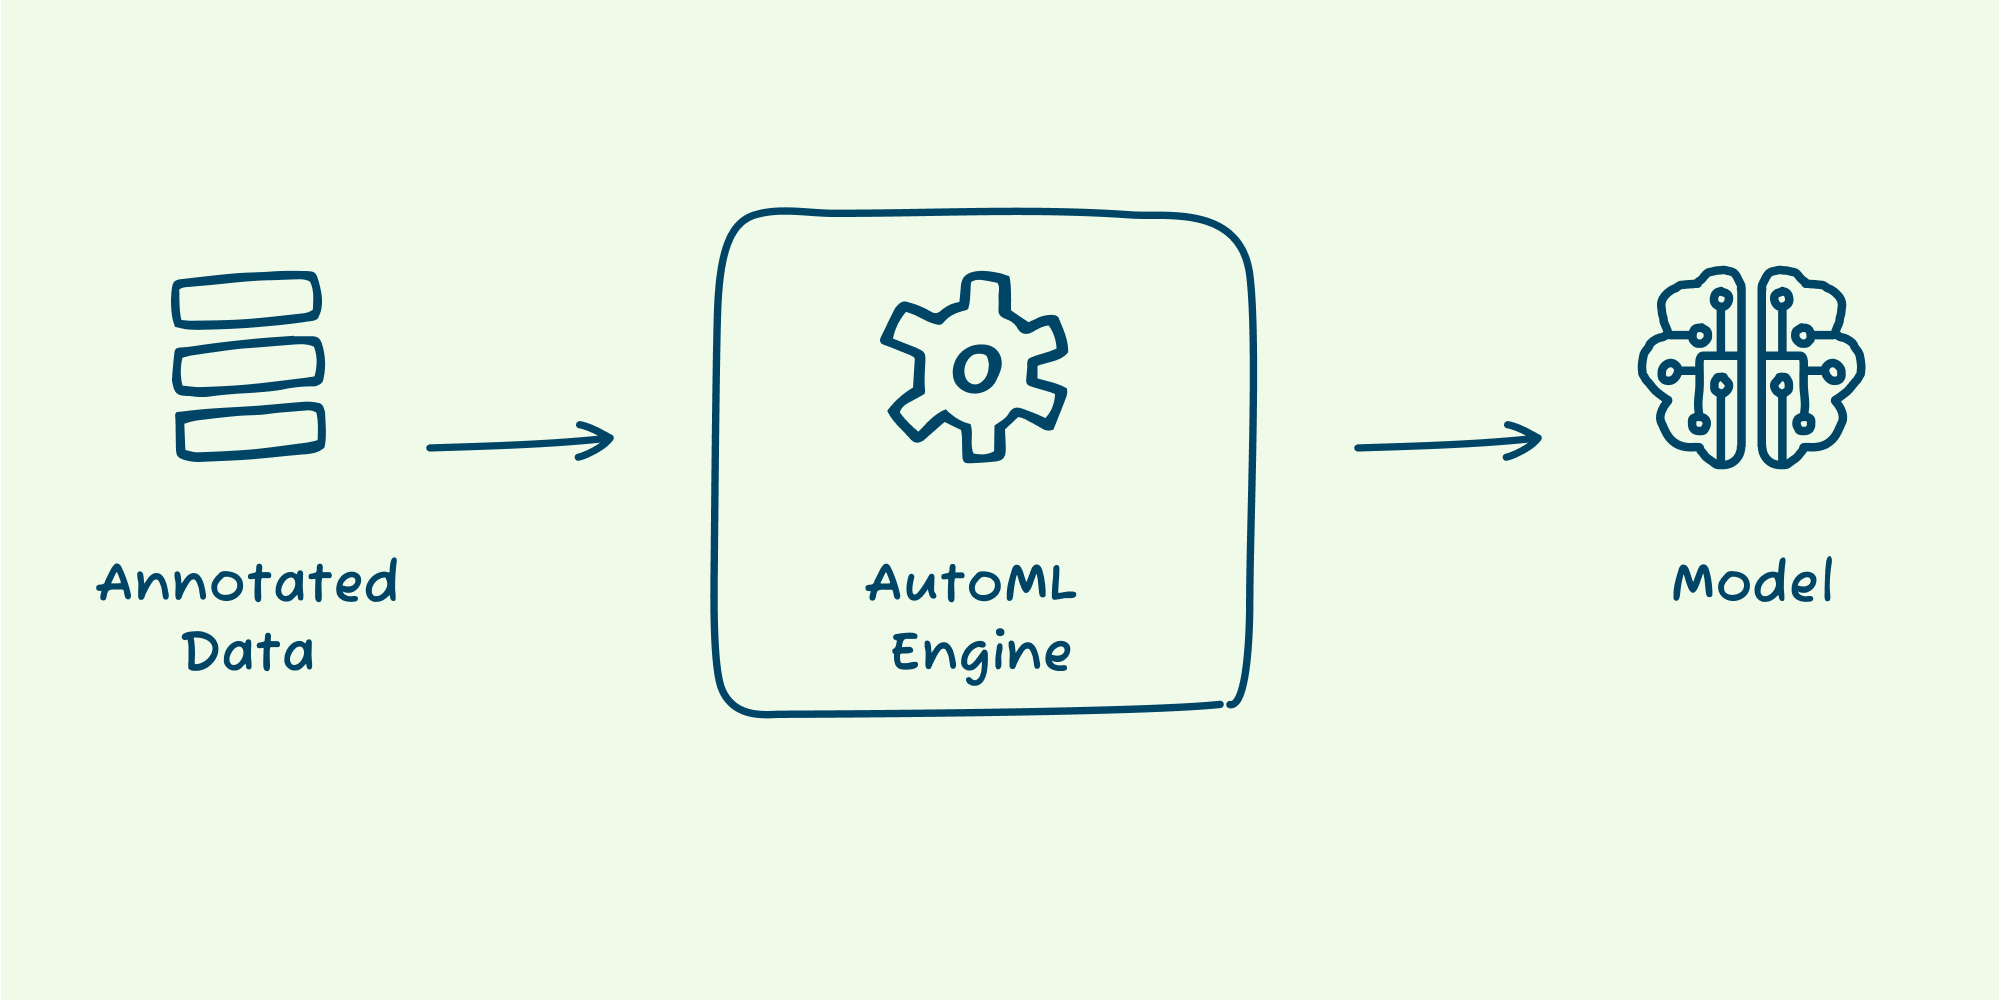 AutoML can take you from annotated data to a trained model